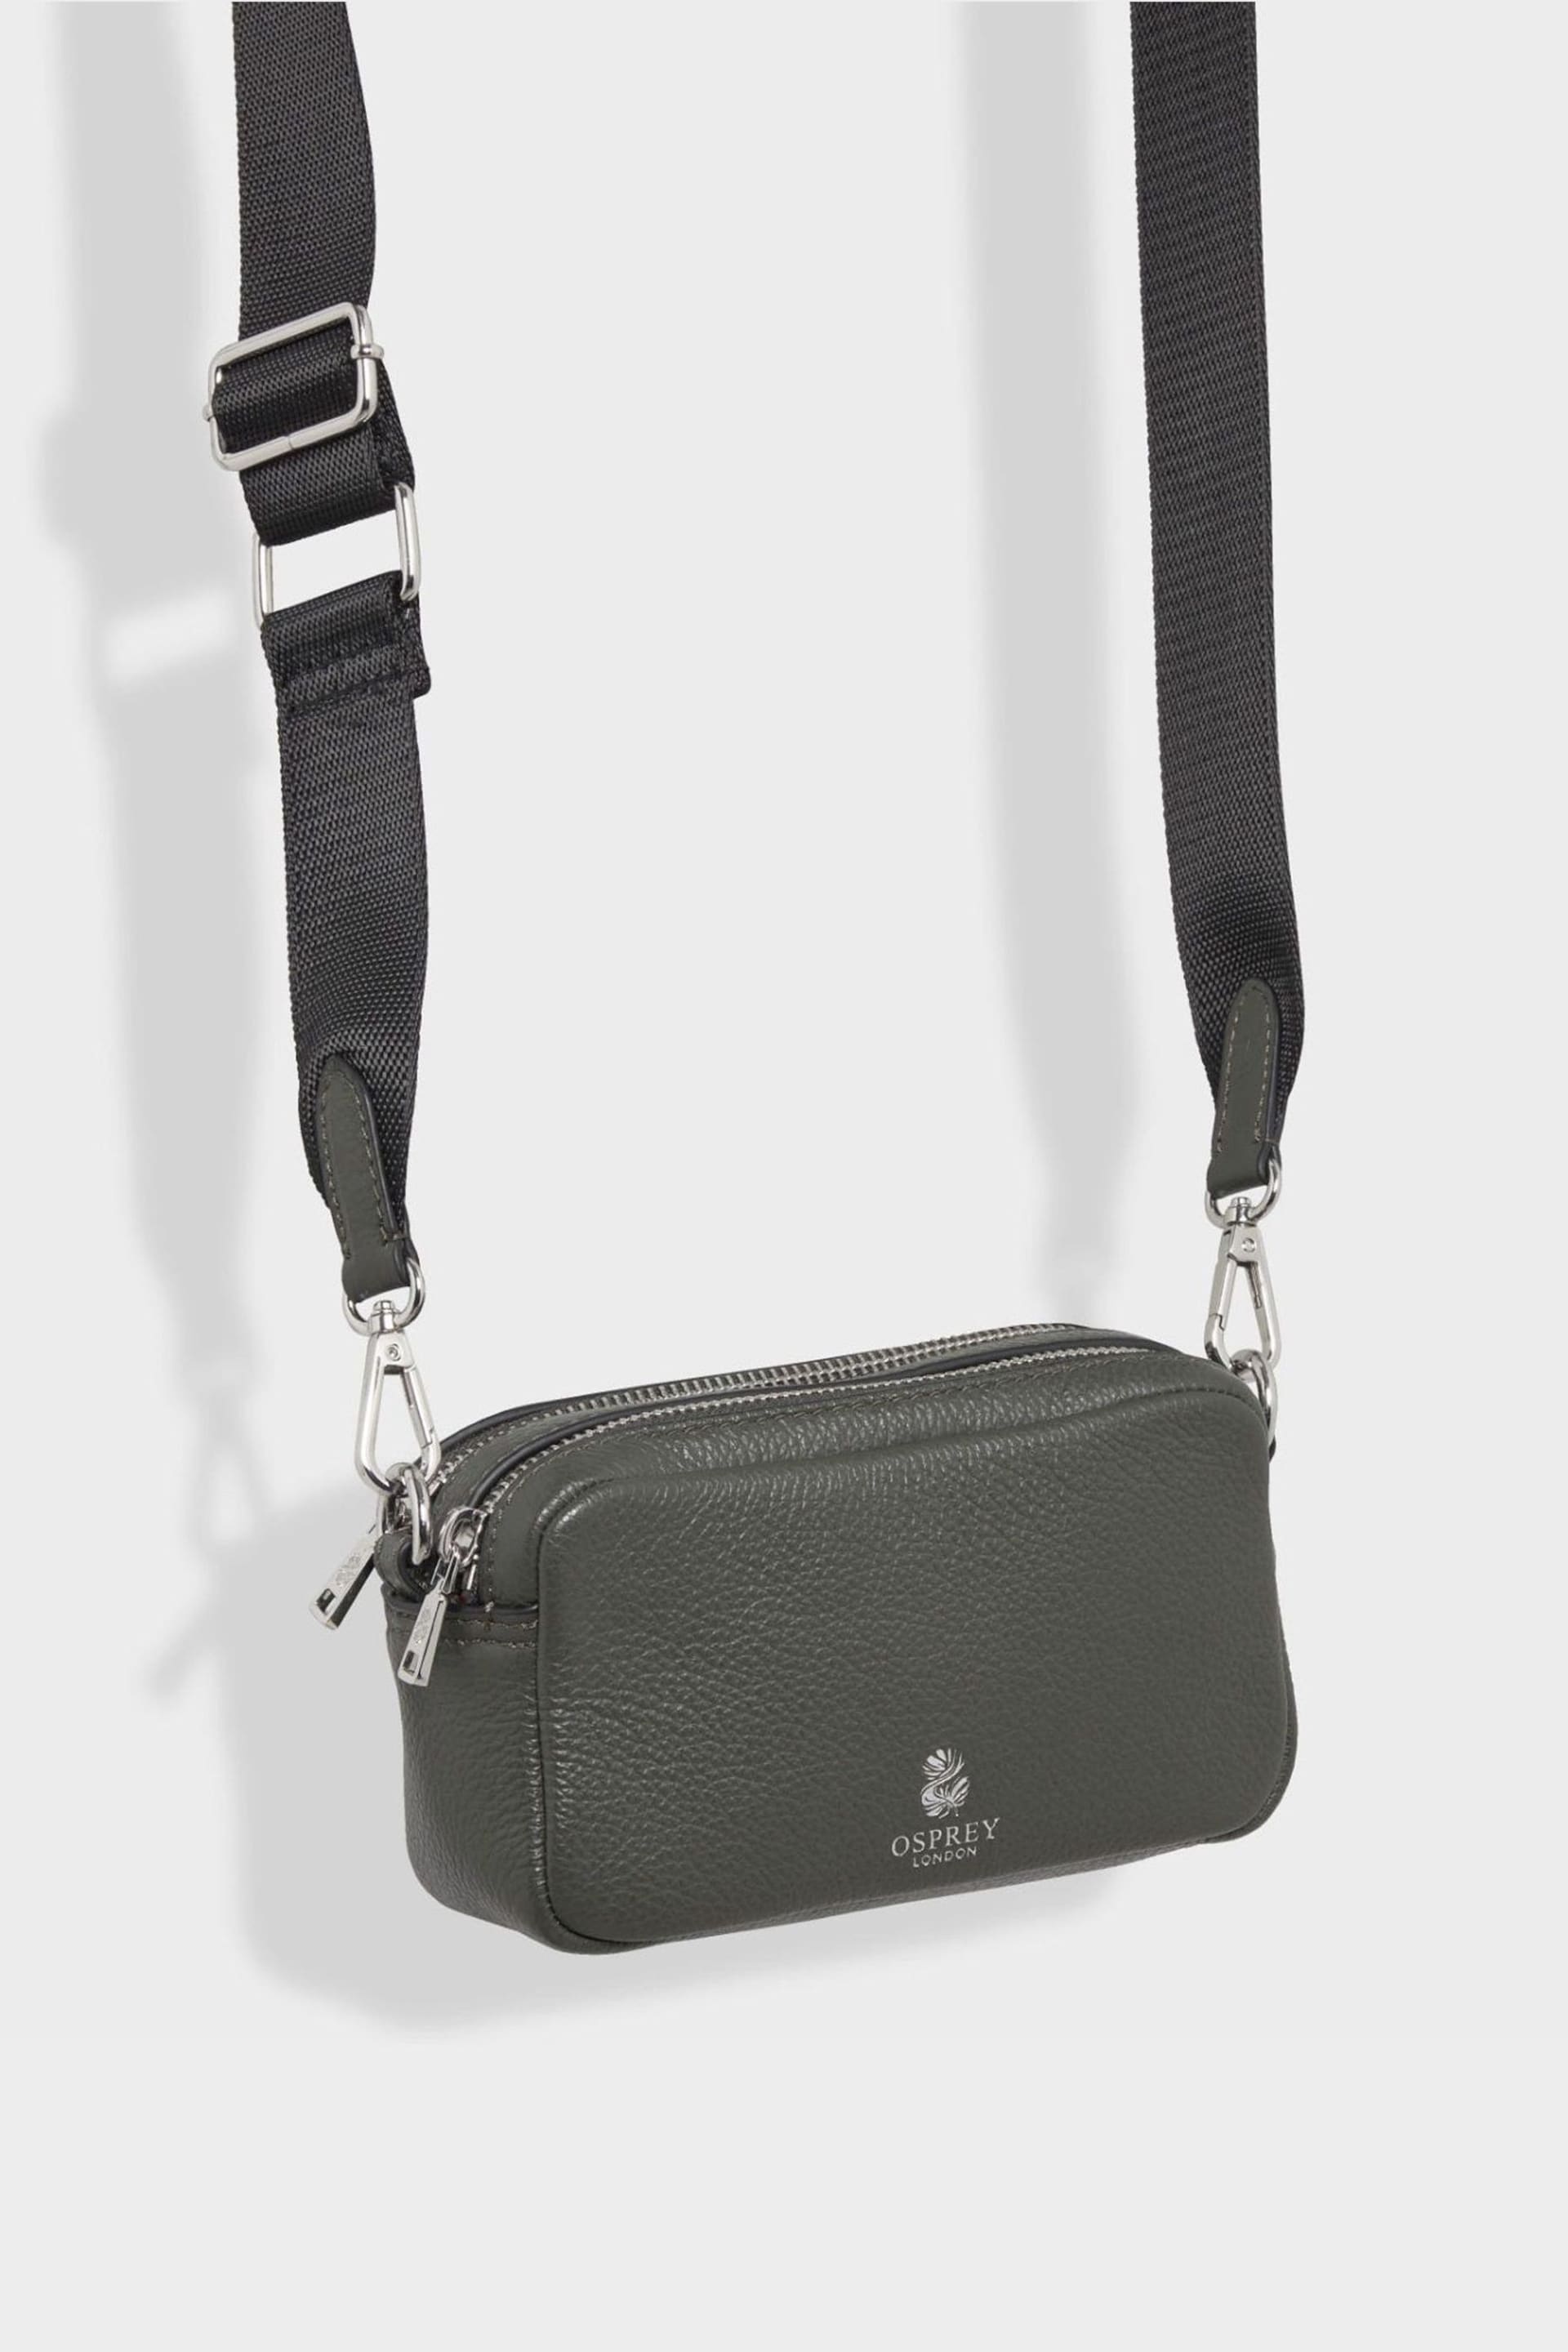 OSPREY LONDON Chester Leather Cross-Body - Image 1 of 7